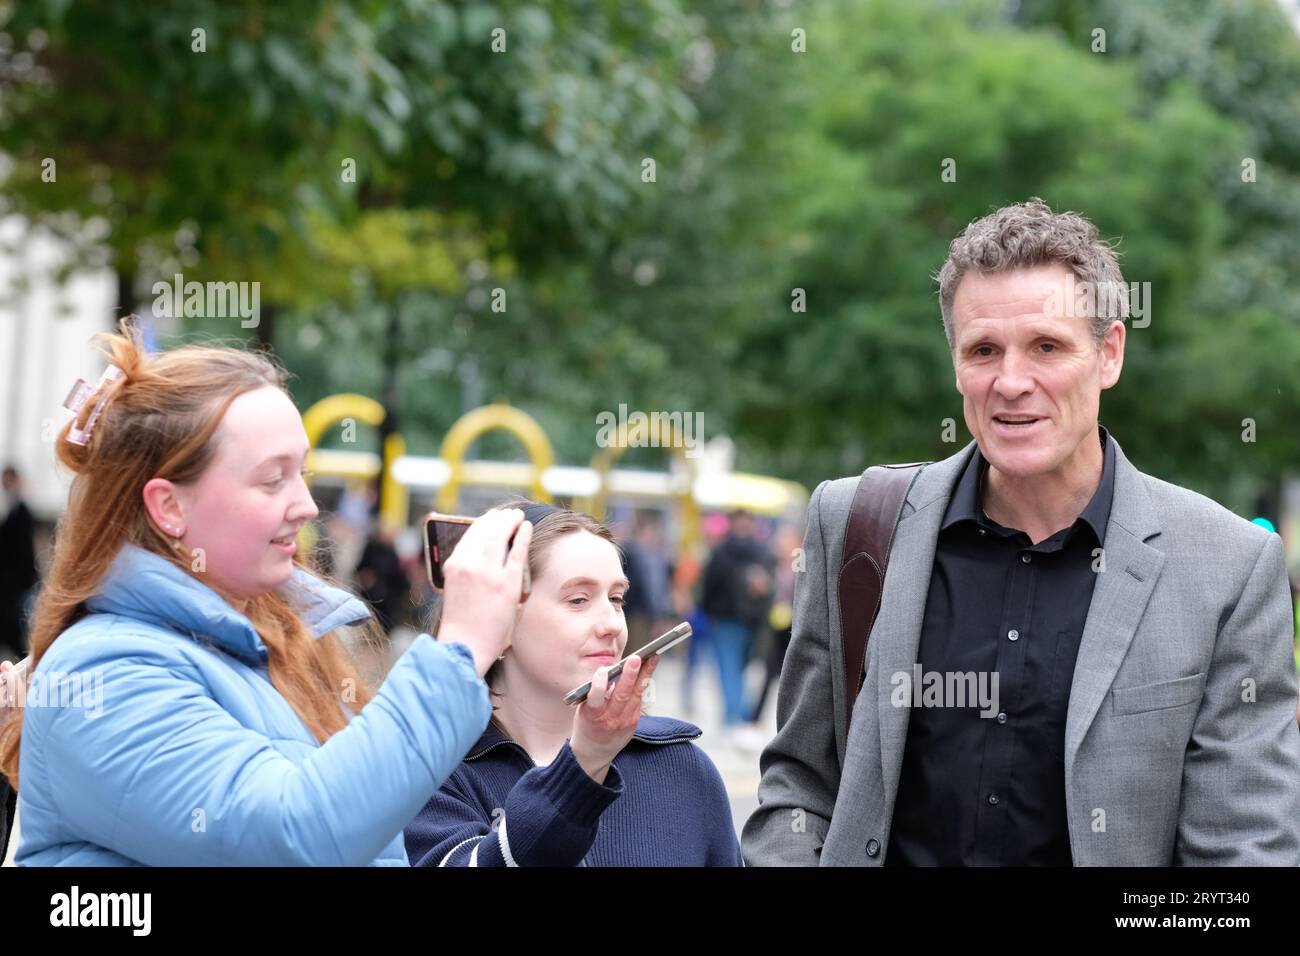 Manchester, UK - Monday 2nd October 2023 – James Cracknell former Olympic gold medalist arrives at the Conservative Party Conference - Mr Cracknell is the Tory party candidate for the Colchester constituency - Photo Steven May / Alamy Live News Stock Photo